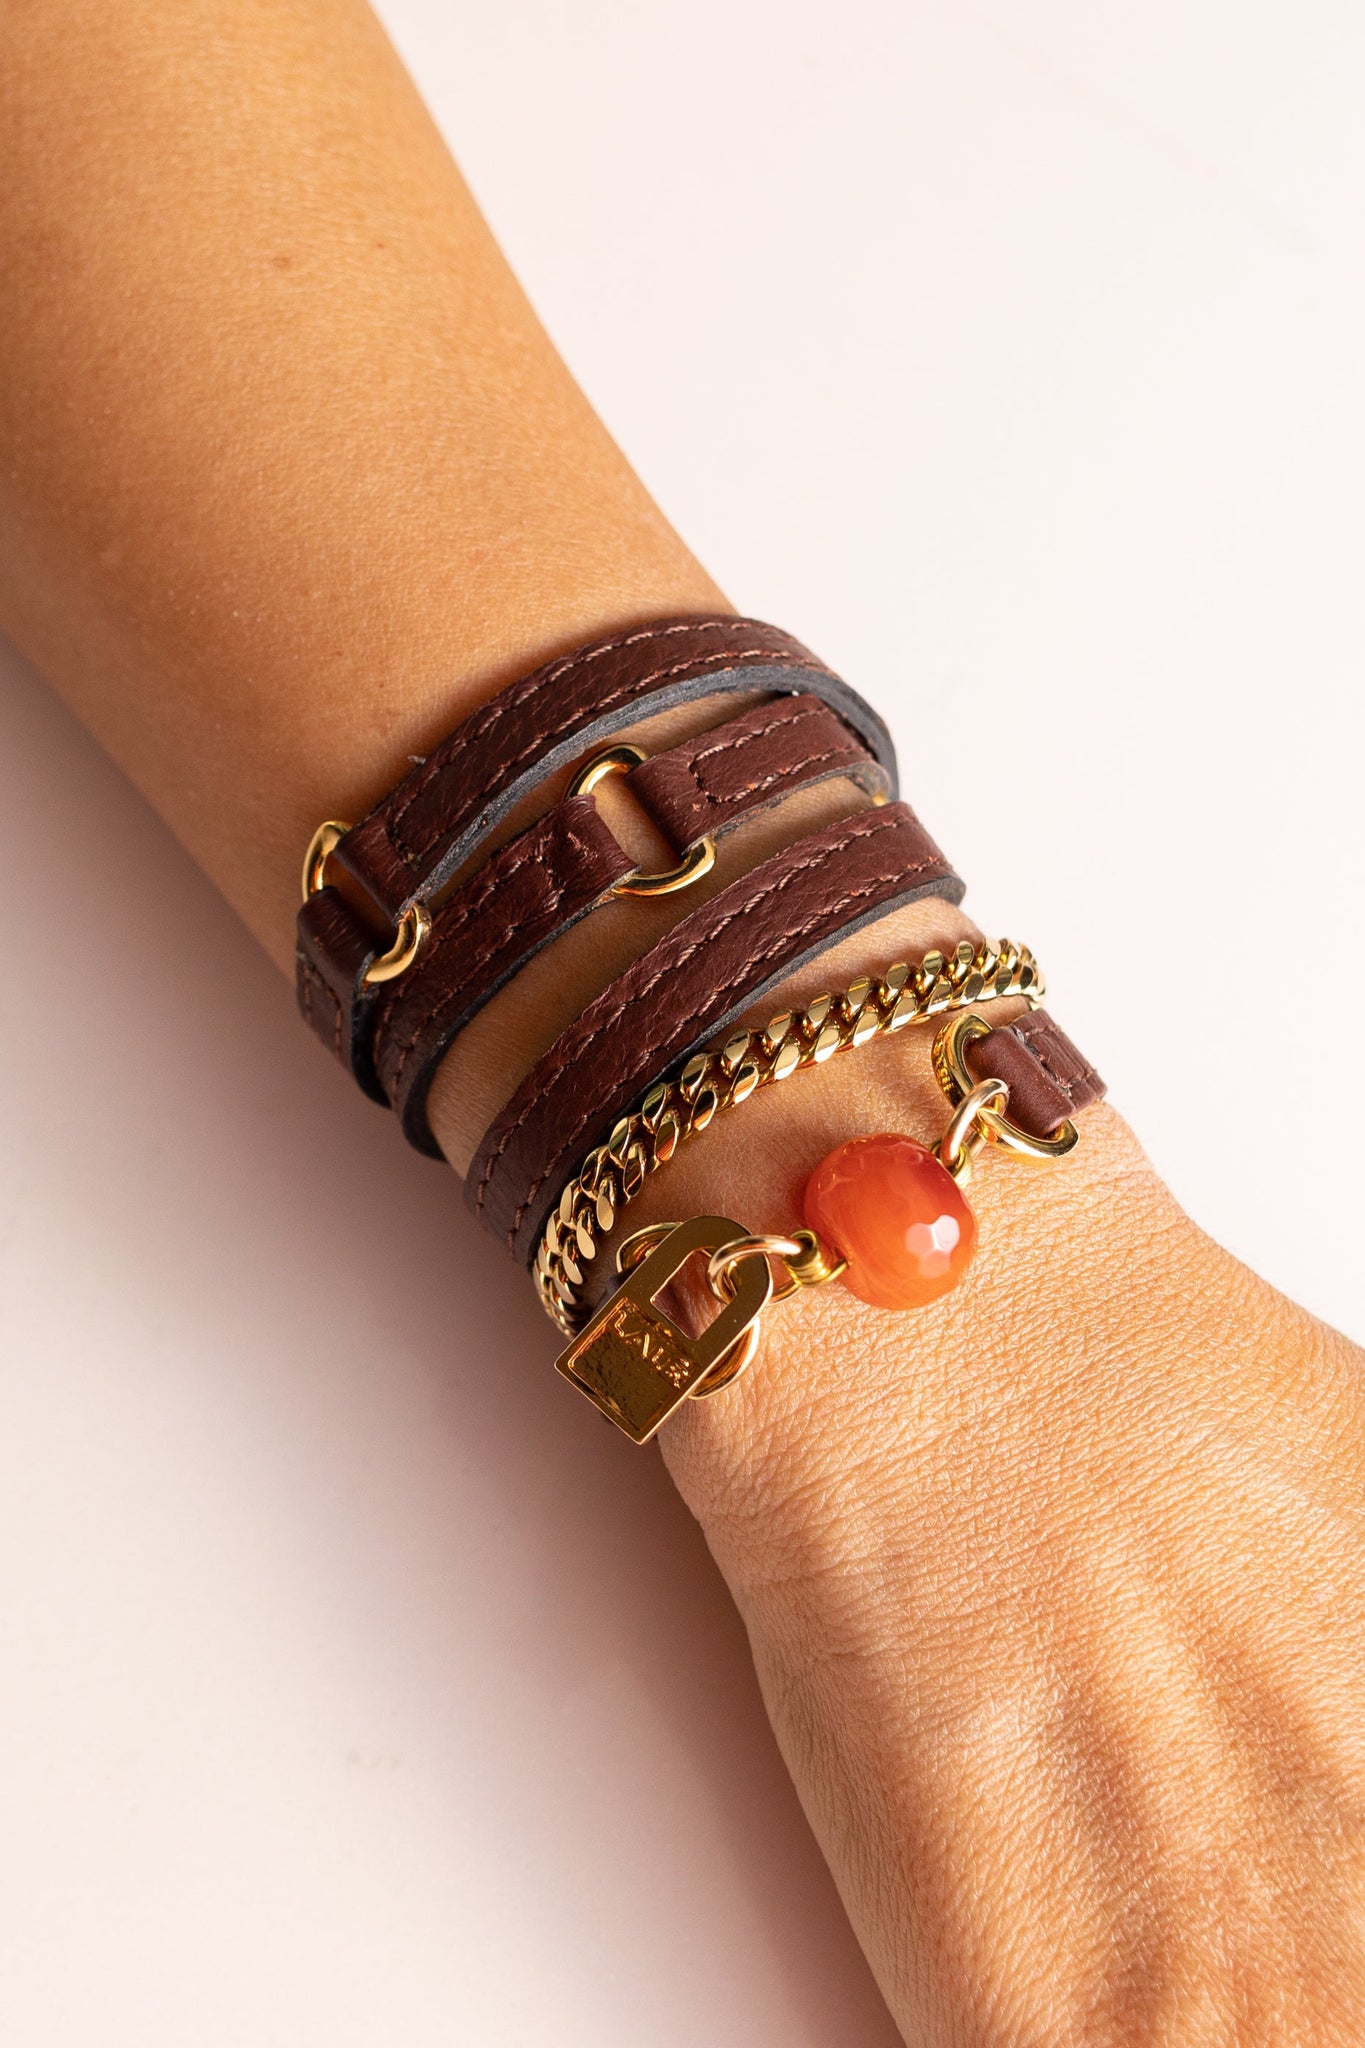 Wrap Around Bracelet - Brown Leather and Carnelian Small